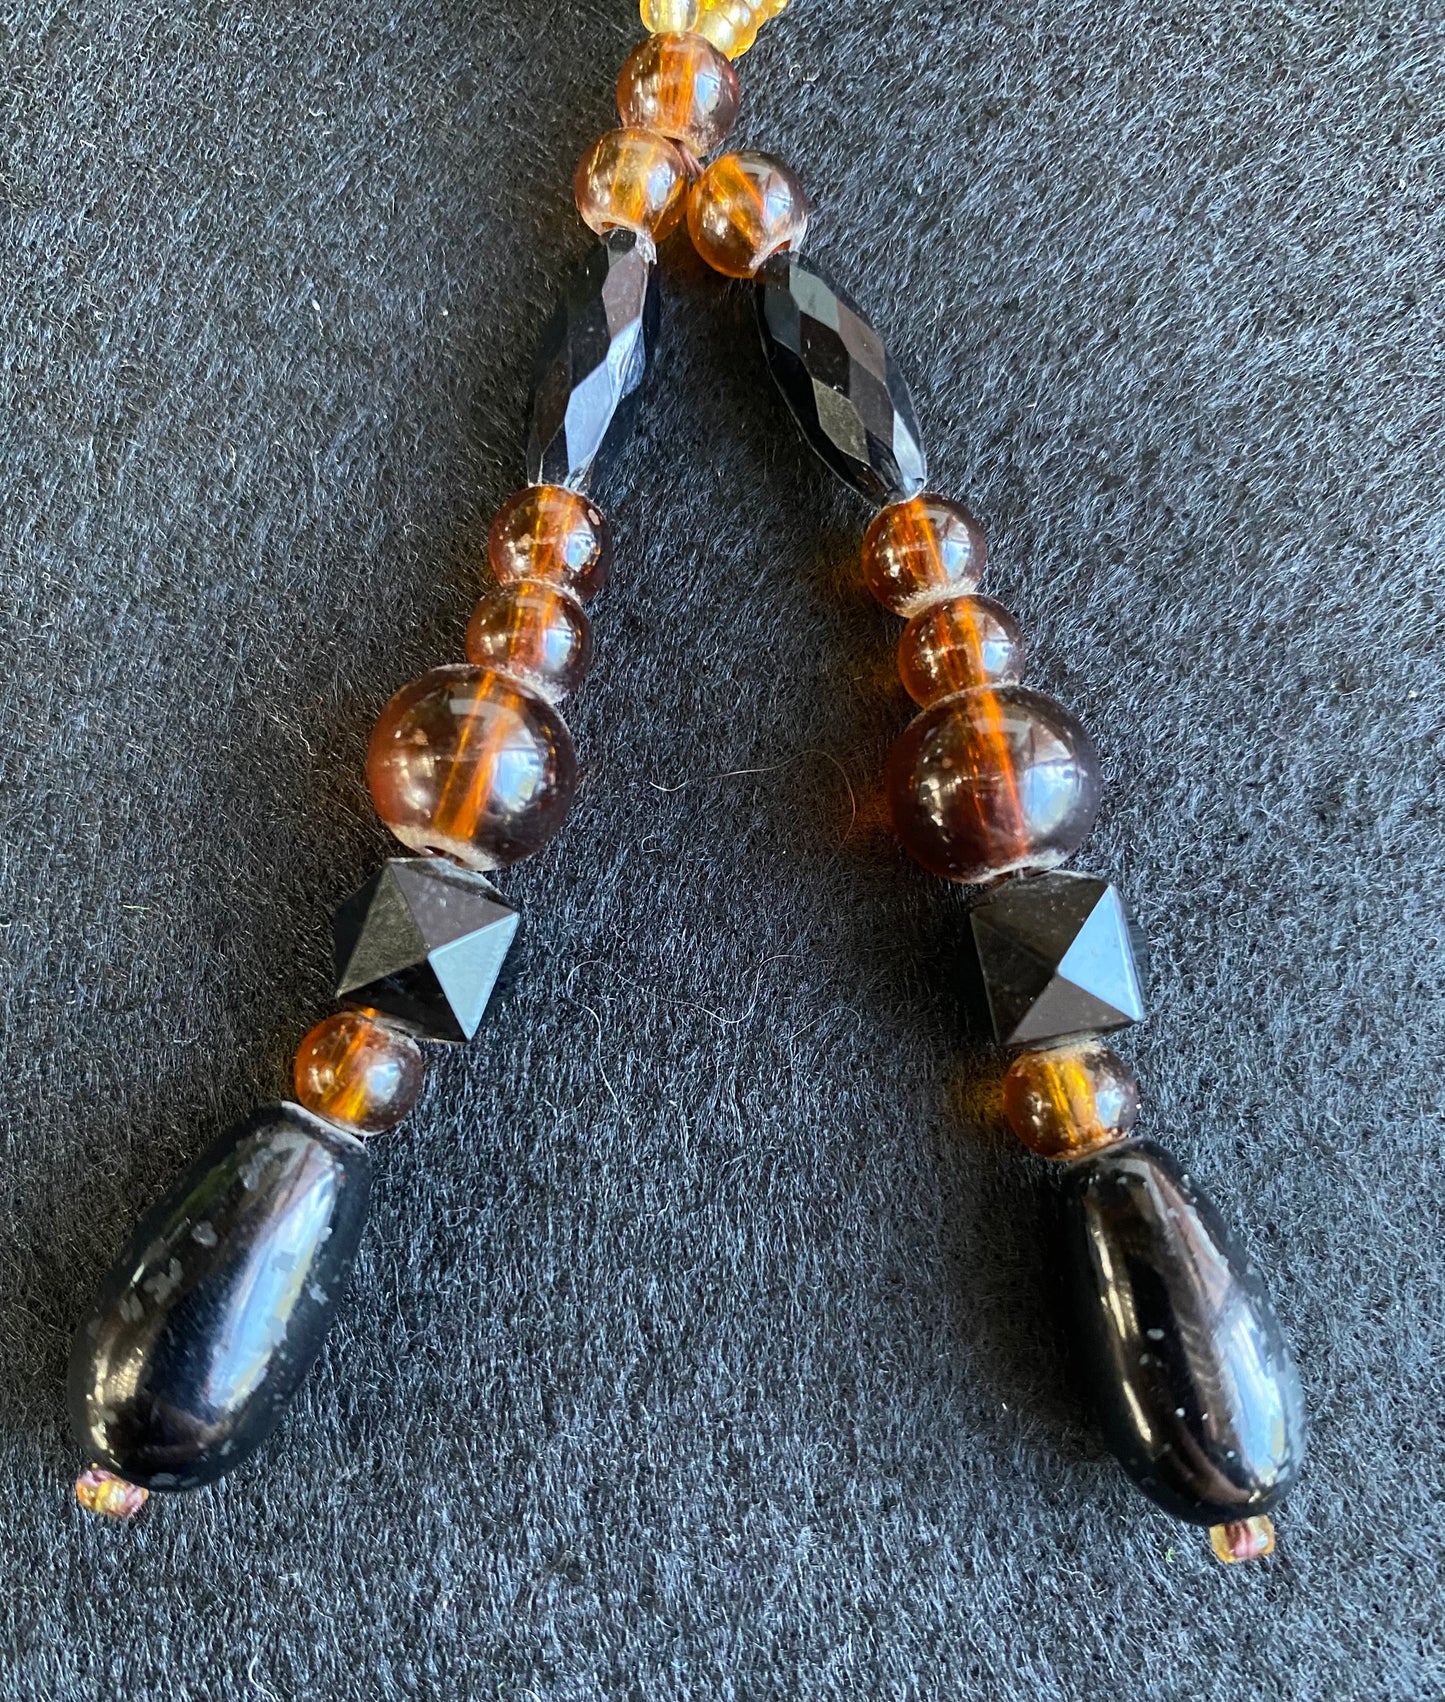 Long Glass And Amber Vintage Necklace